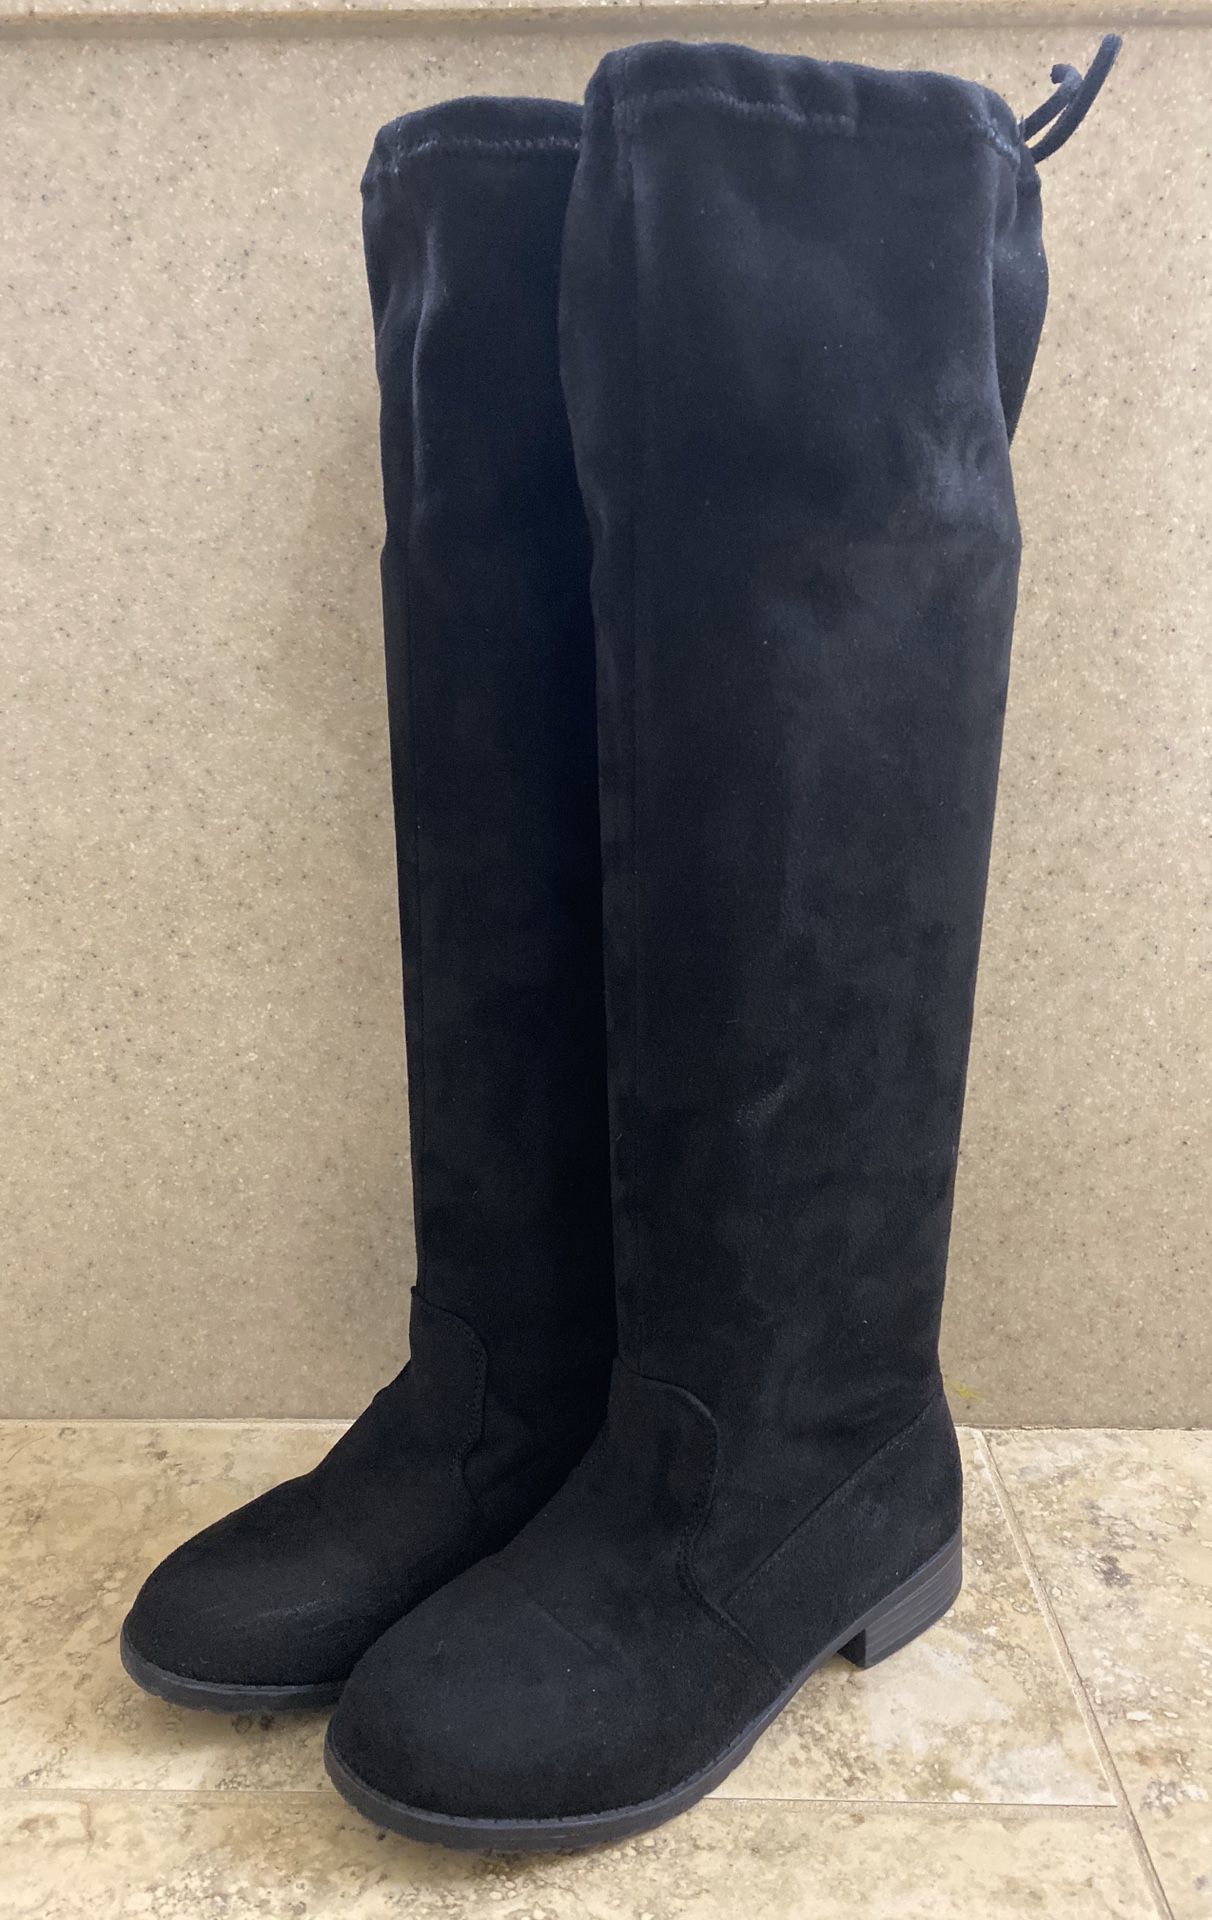 black faux suede over the knee boots (size 3)